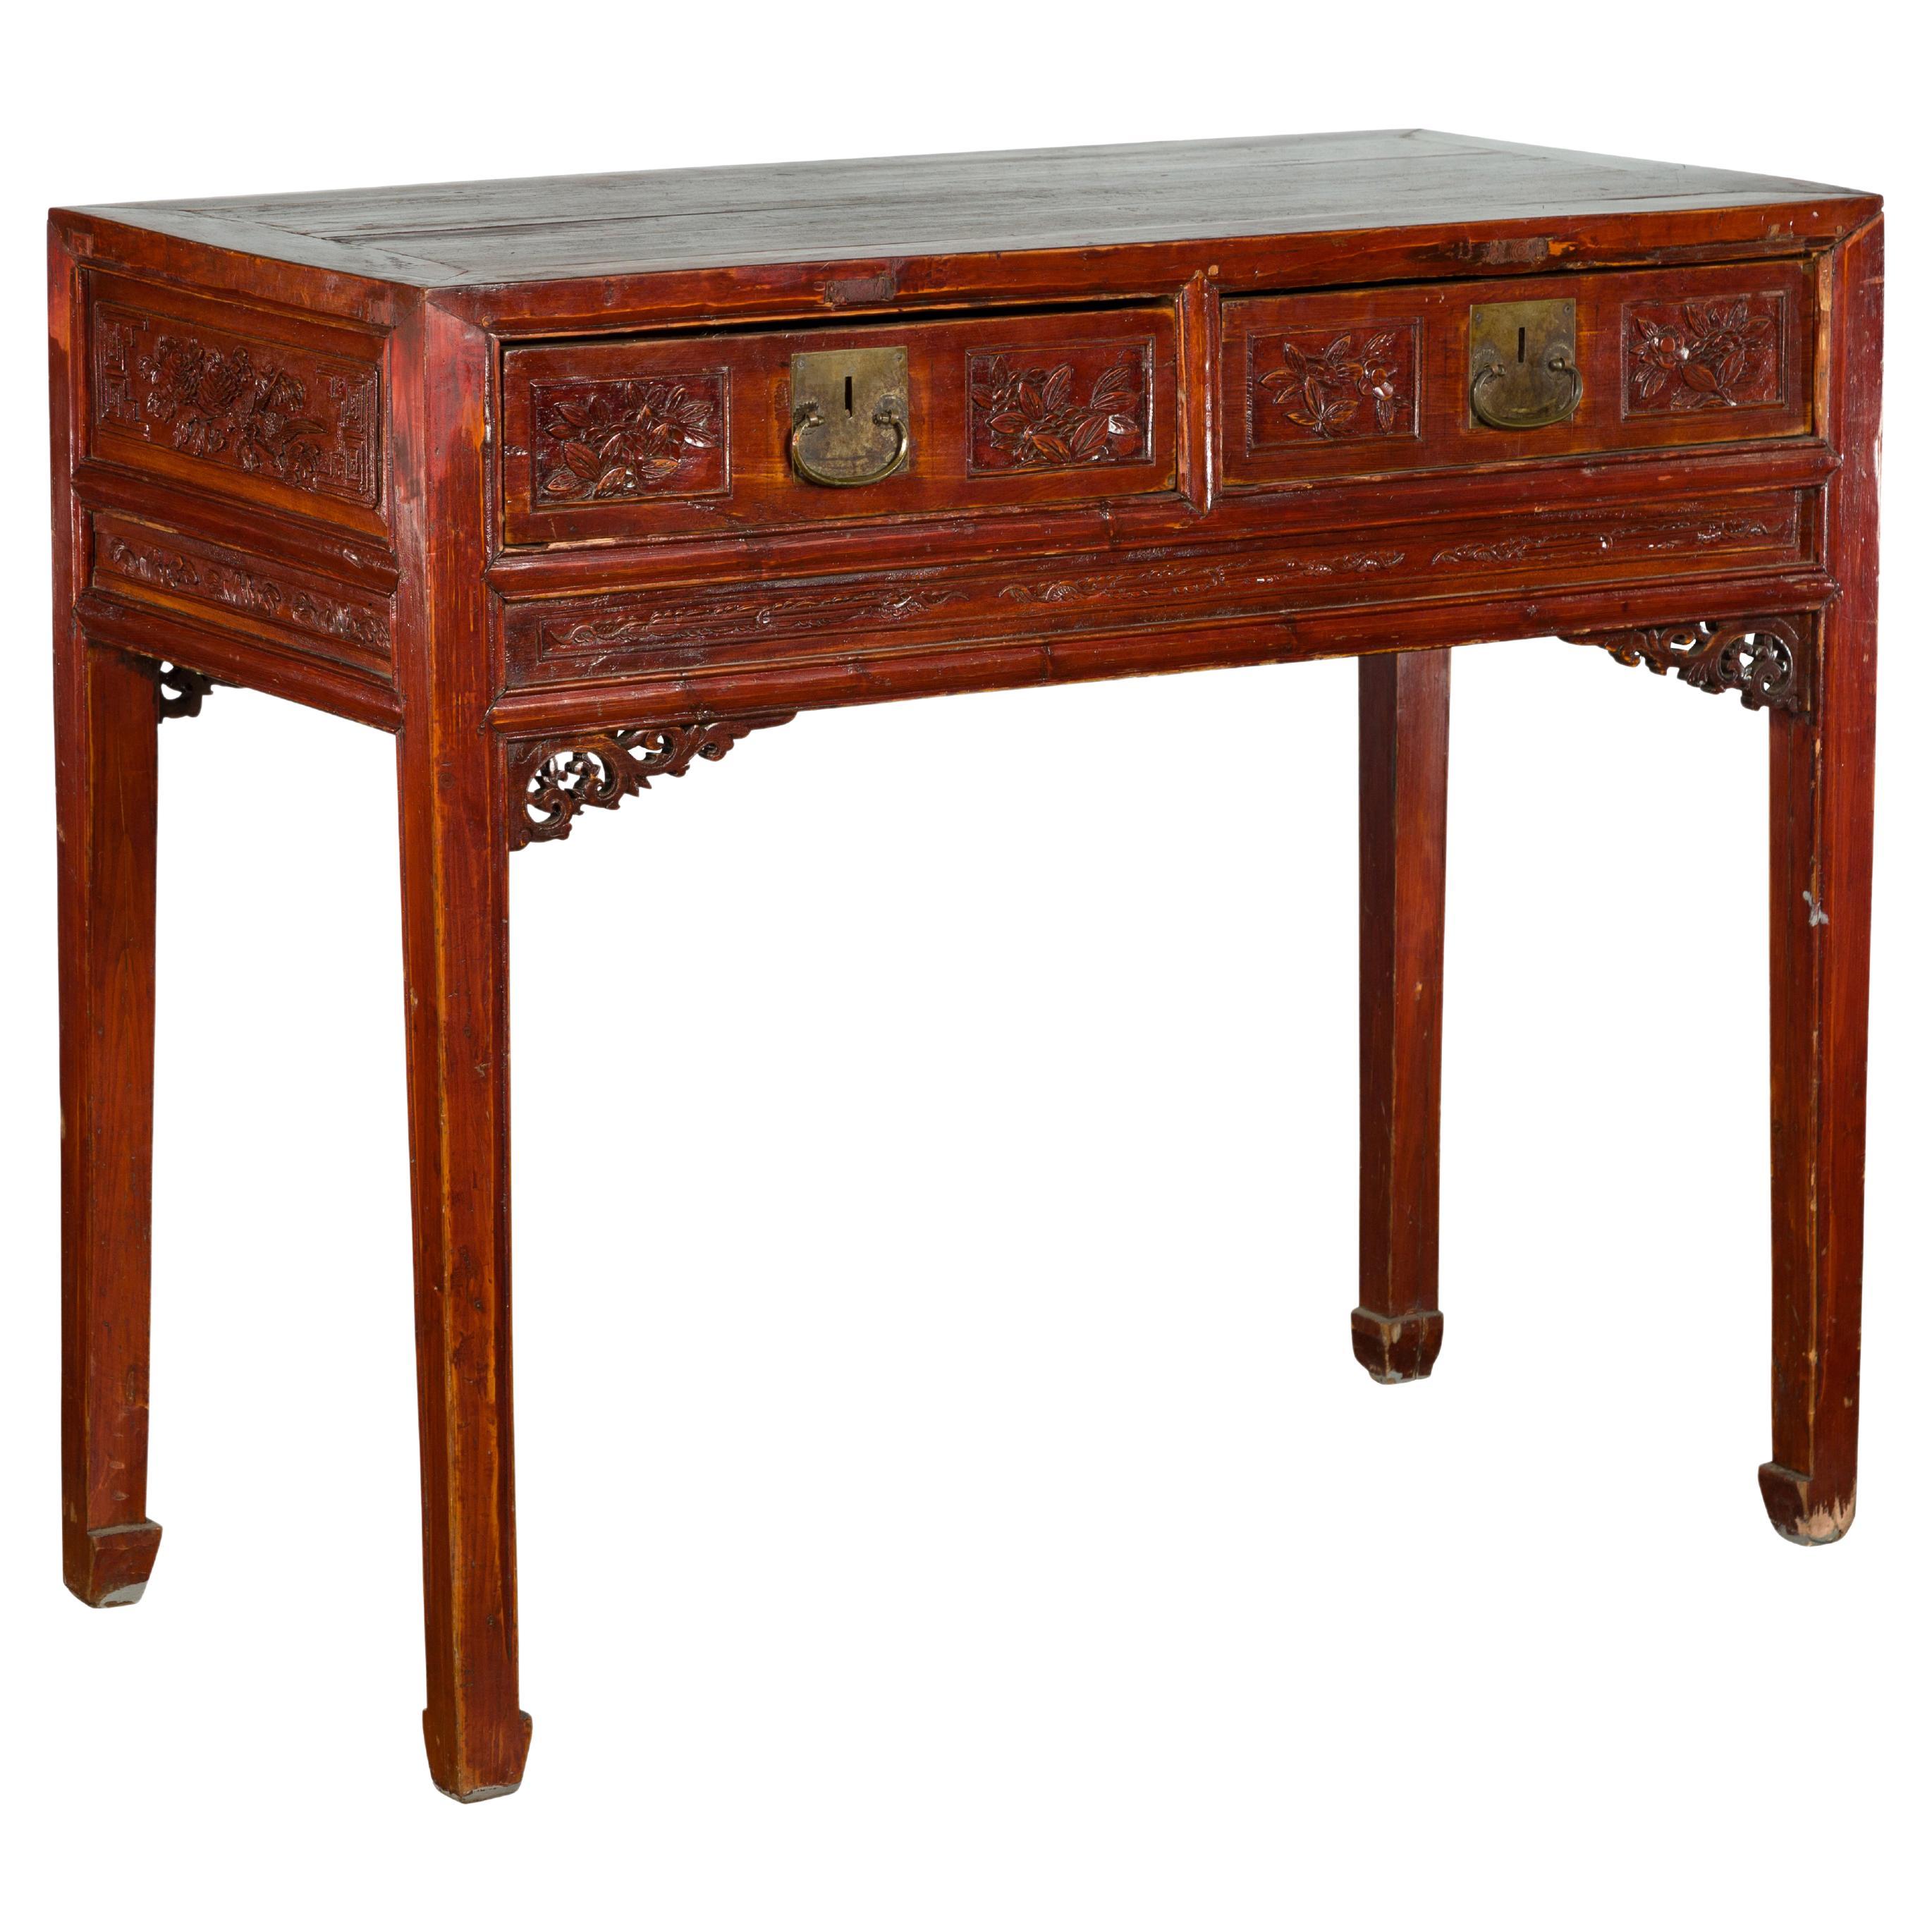 Chinese Qing Dynasty Period 19th Century Reddish Brown Table with Two Drawers For Sale